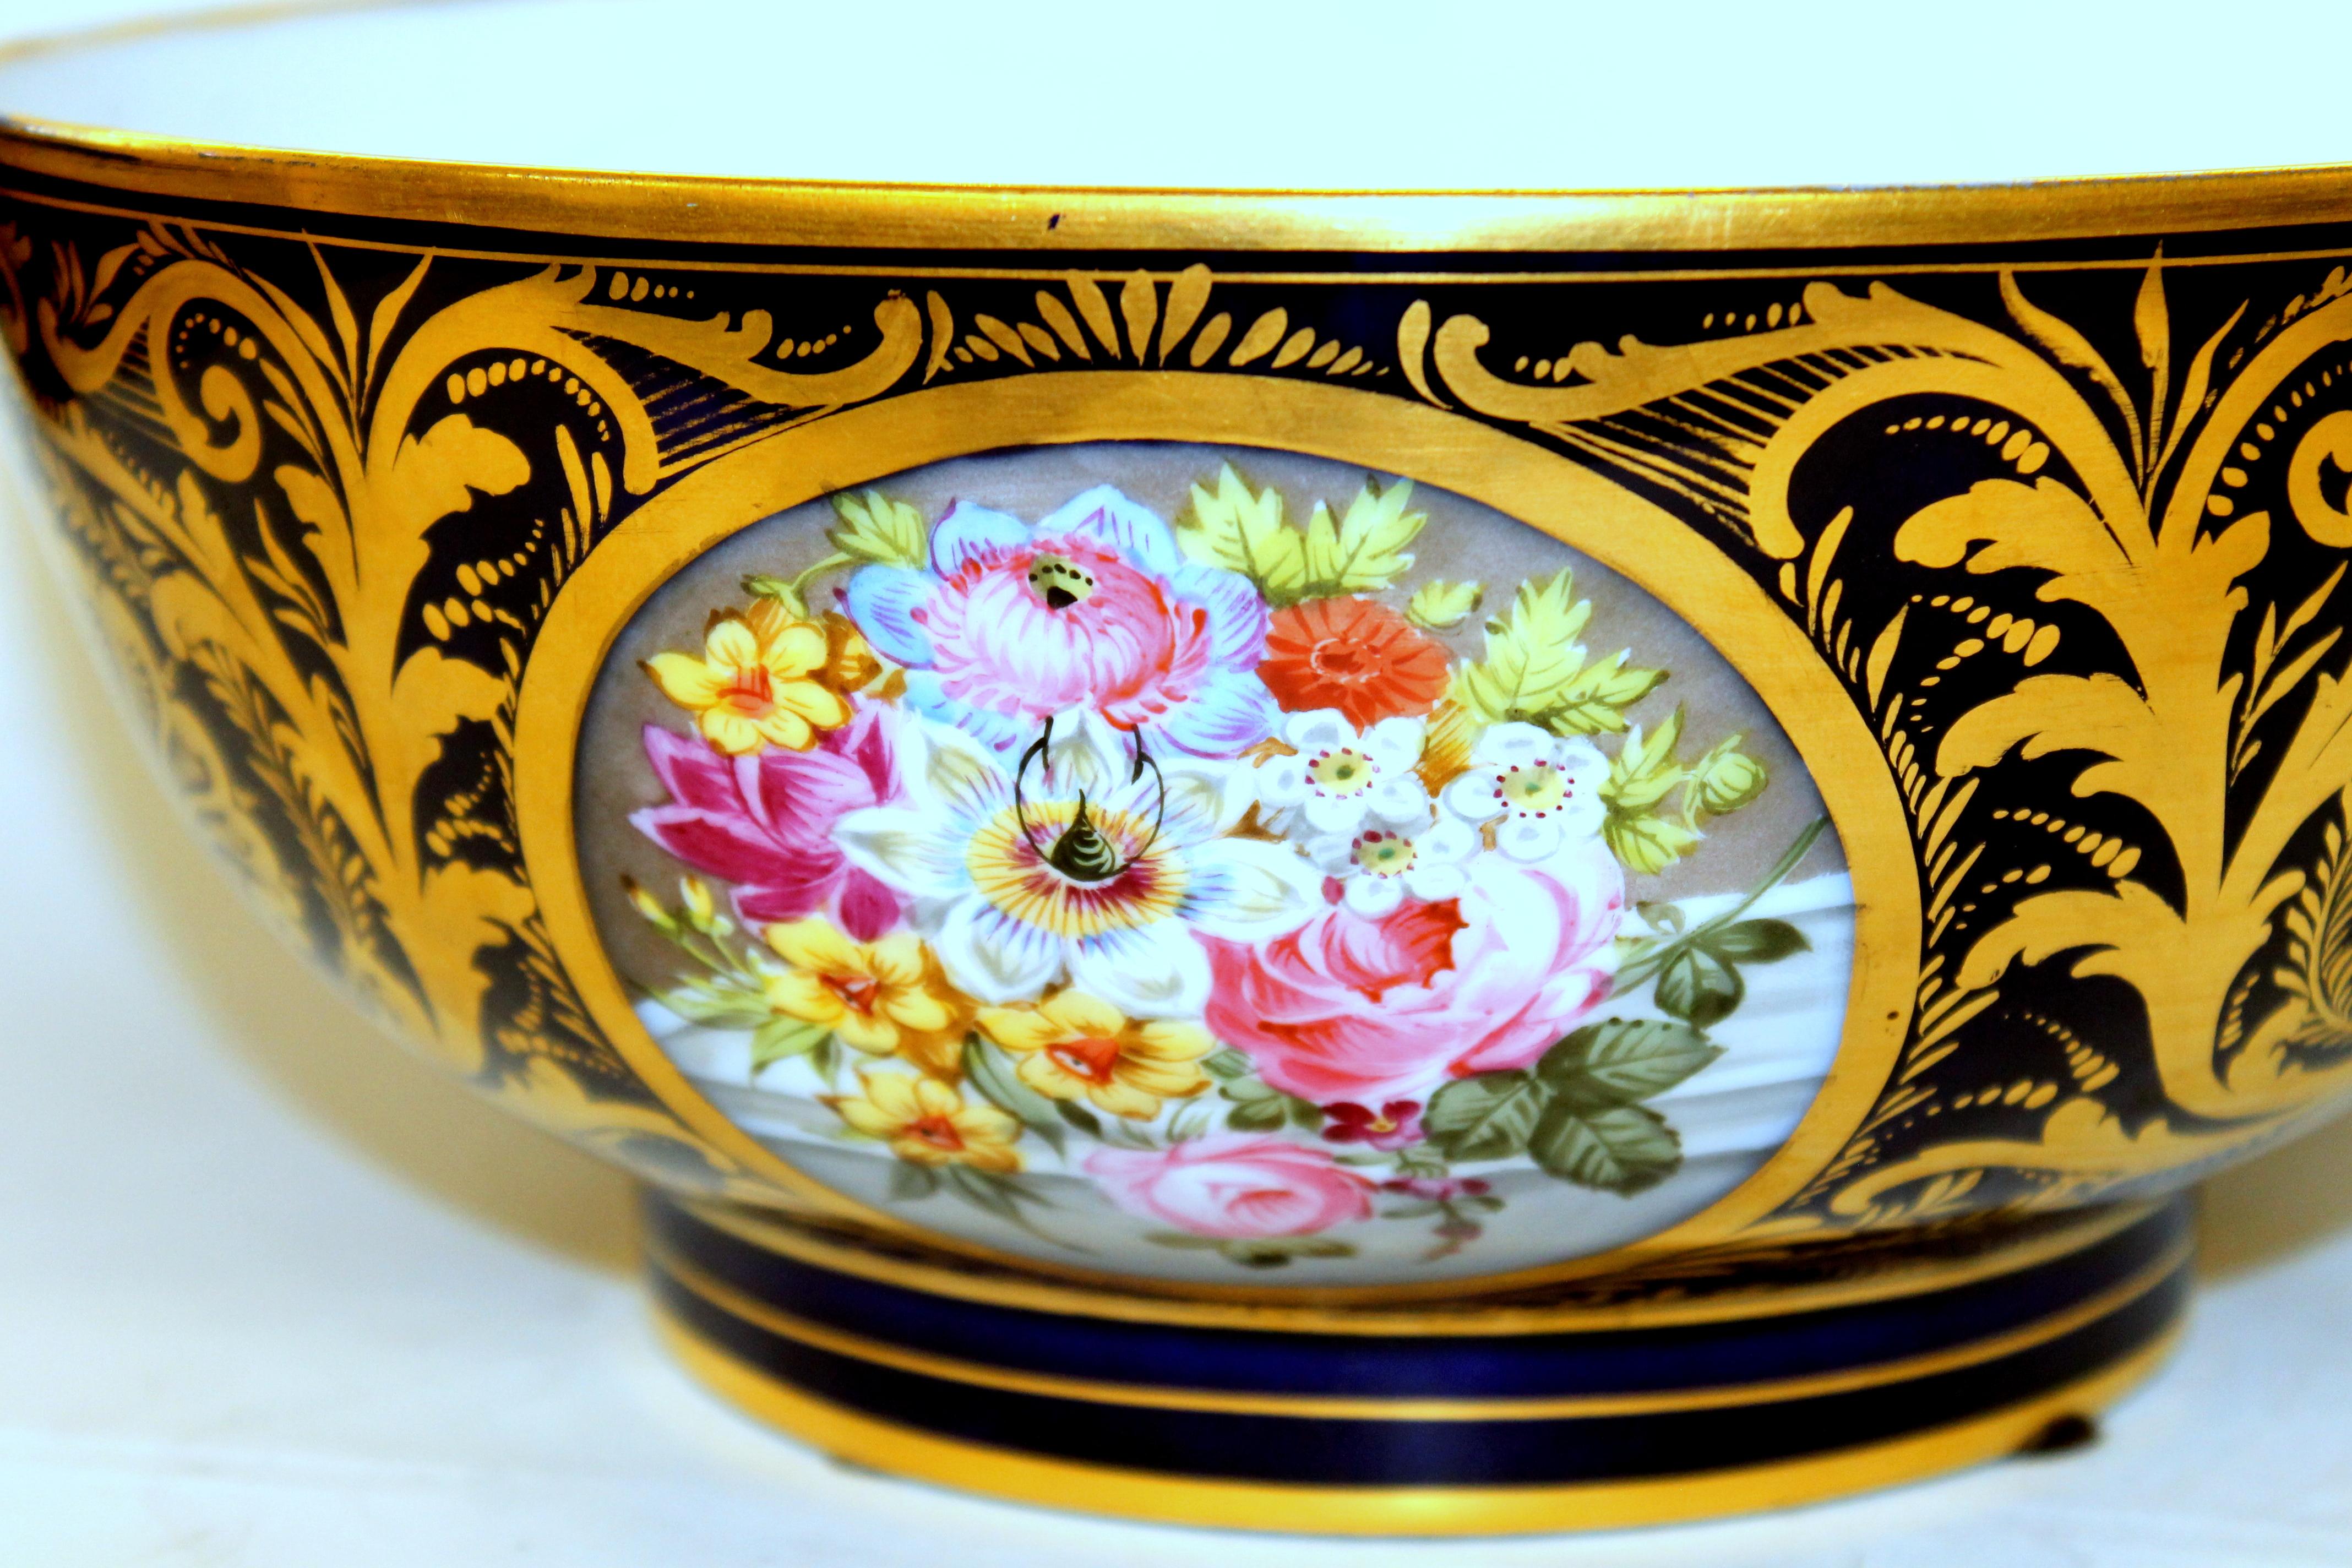 19th Century Antique English Derby Porcelain Hand-Painted Floral and Gilt Cobalt Round Bowl